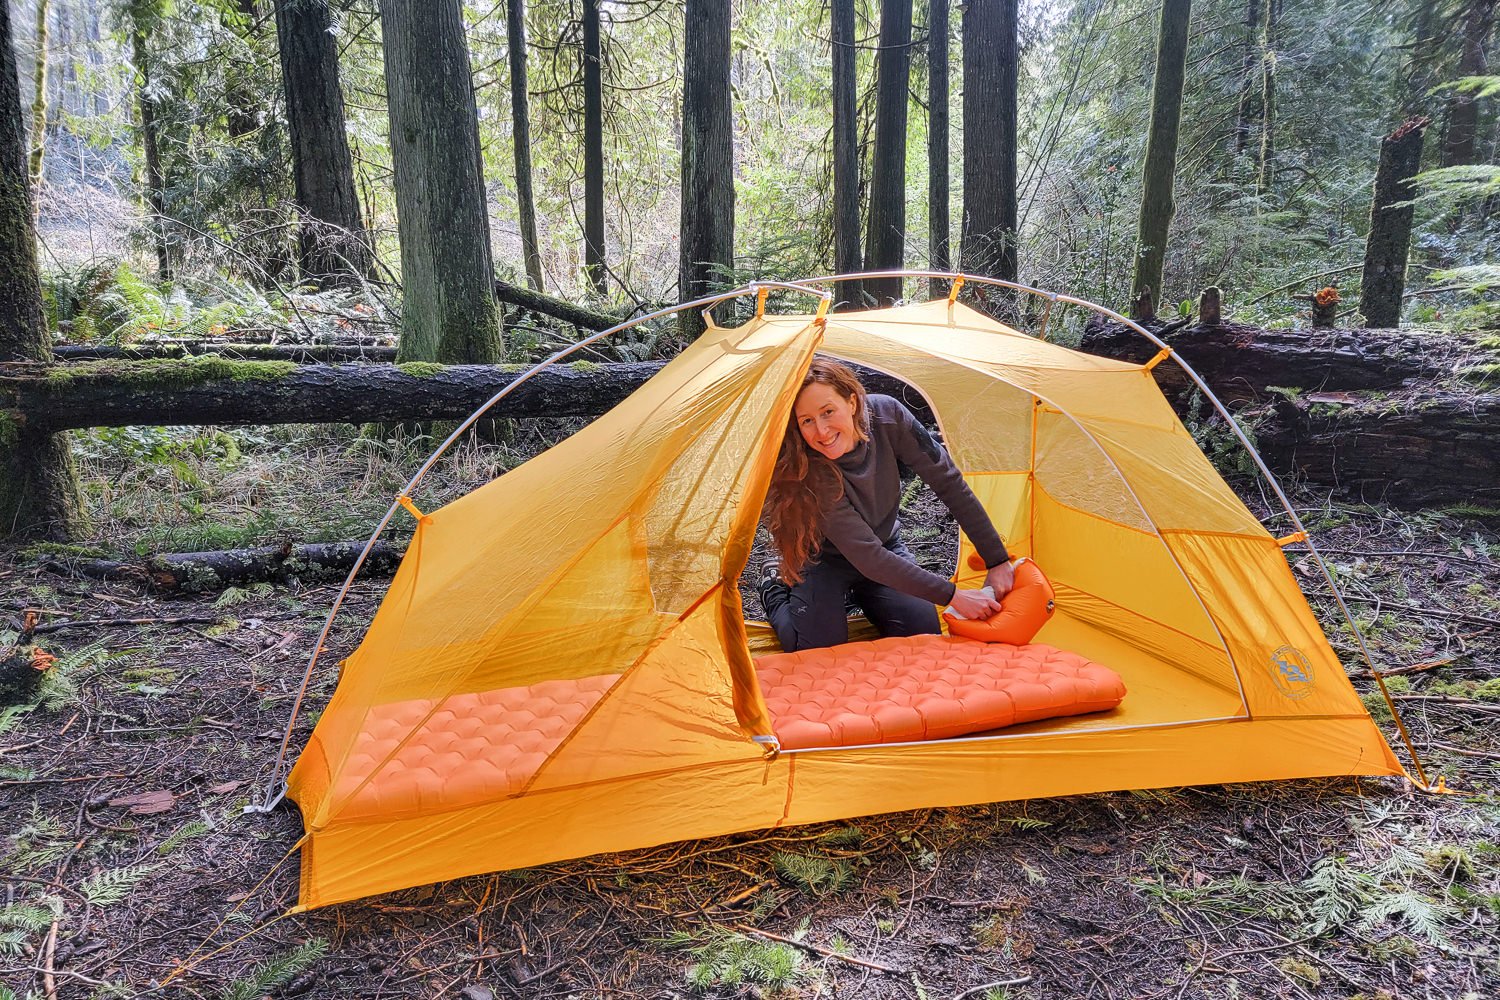 A hiker inside a tent smiling as she blows up the Big Agnes Zoom UL with a pump sack